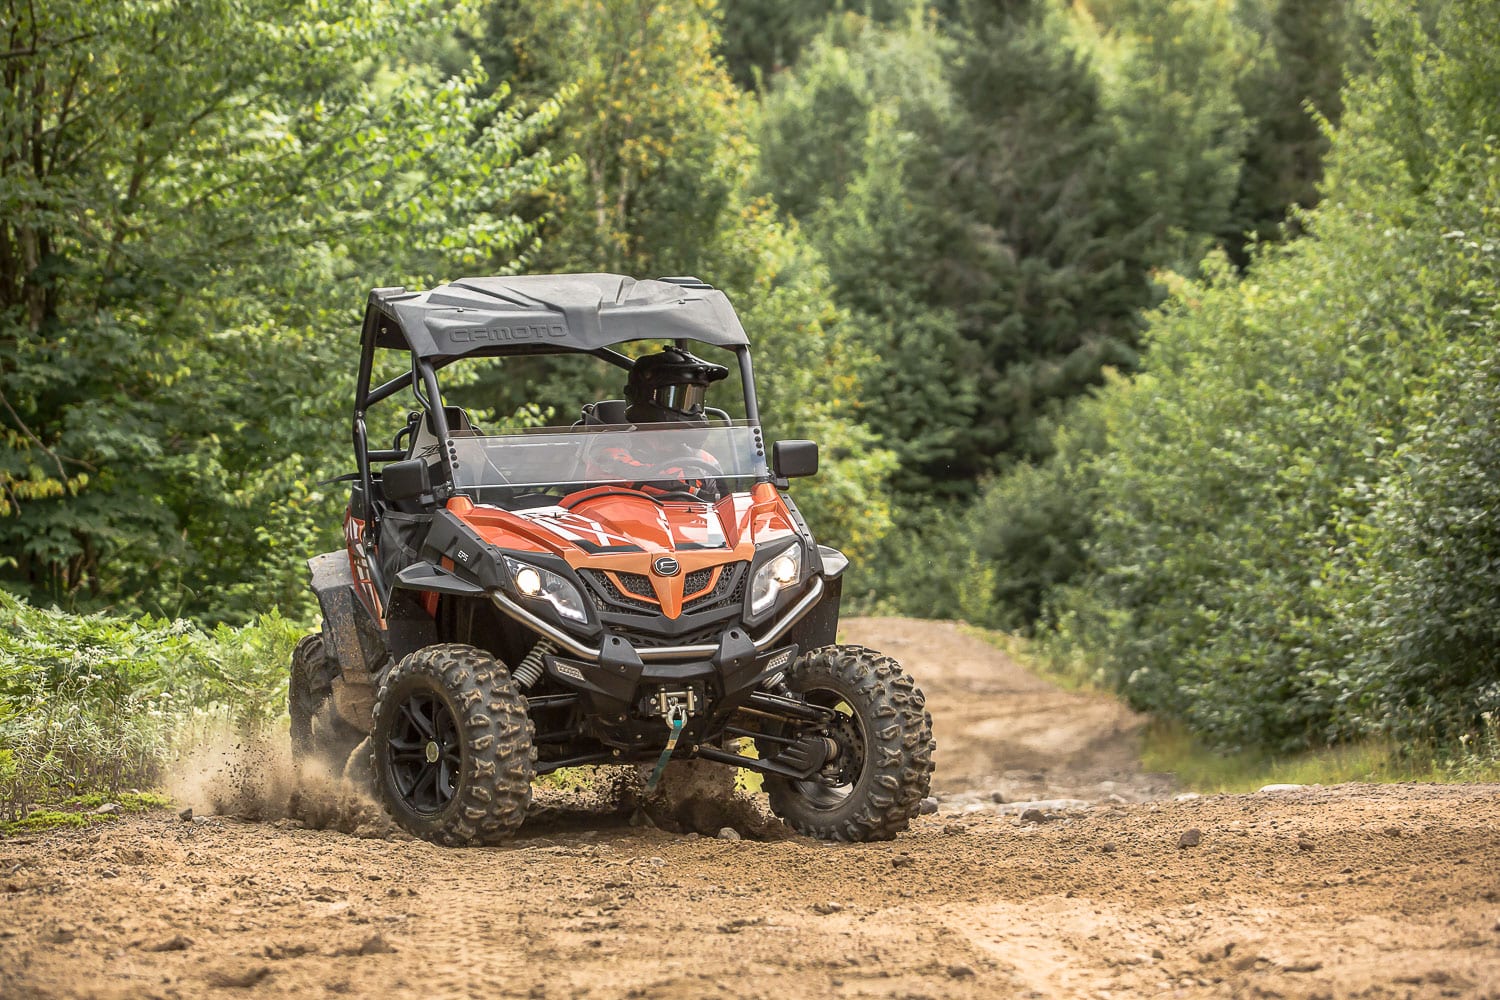 2018 The Most Innovative Year For ATVs And UTVs